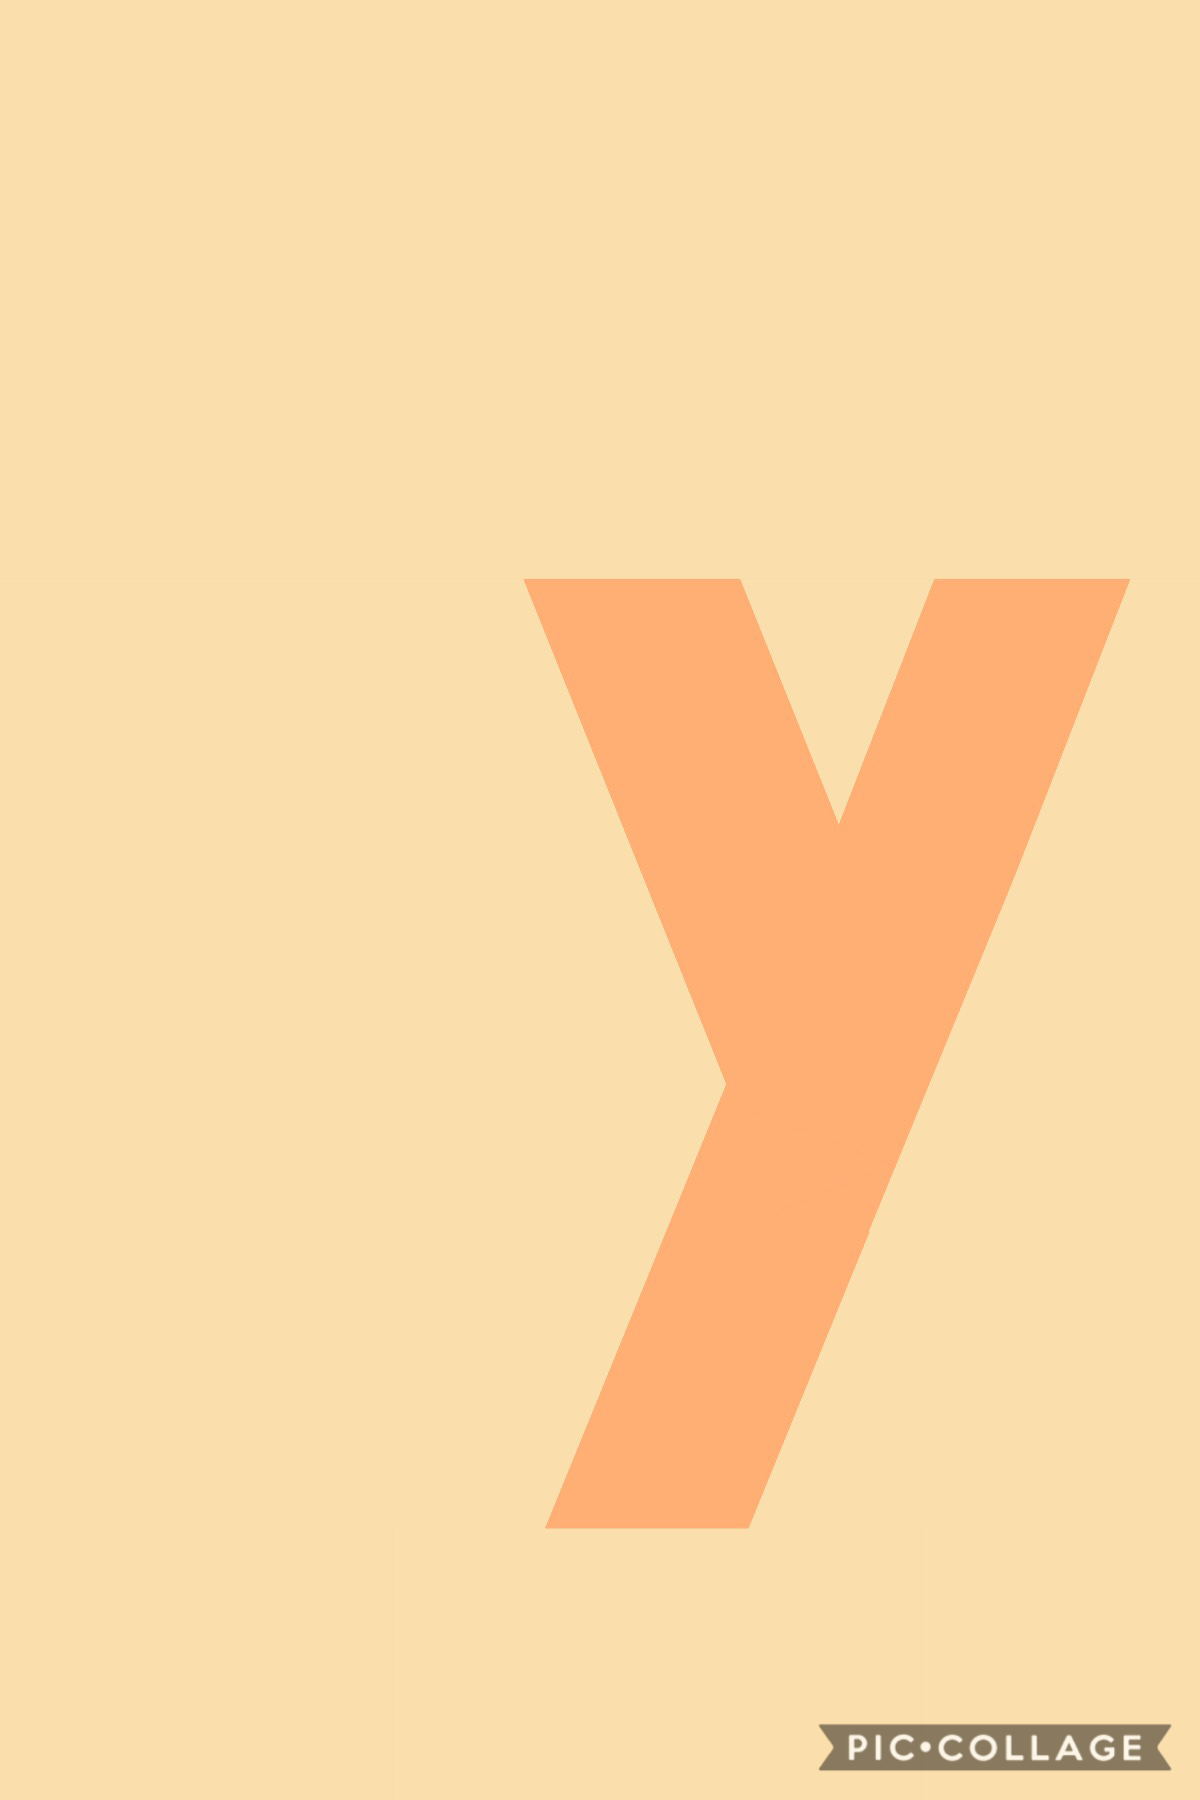 Font 4: Young; Letter y